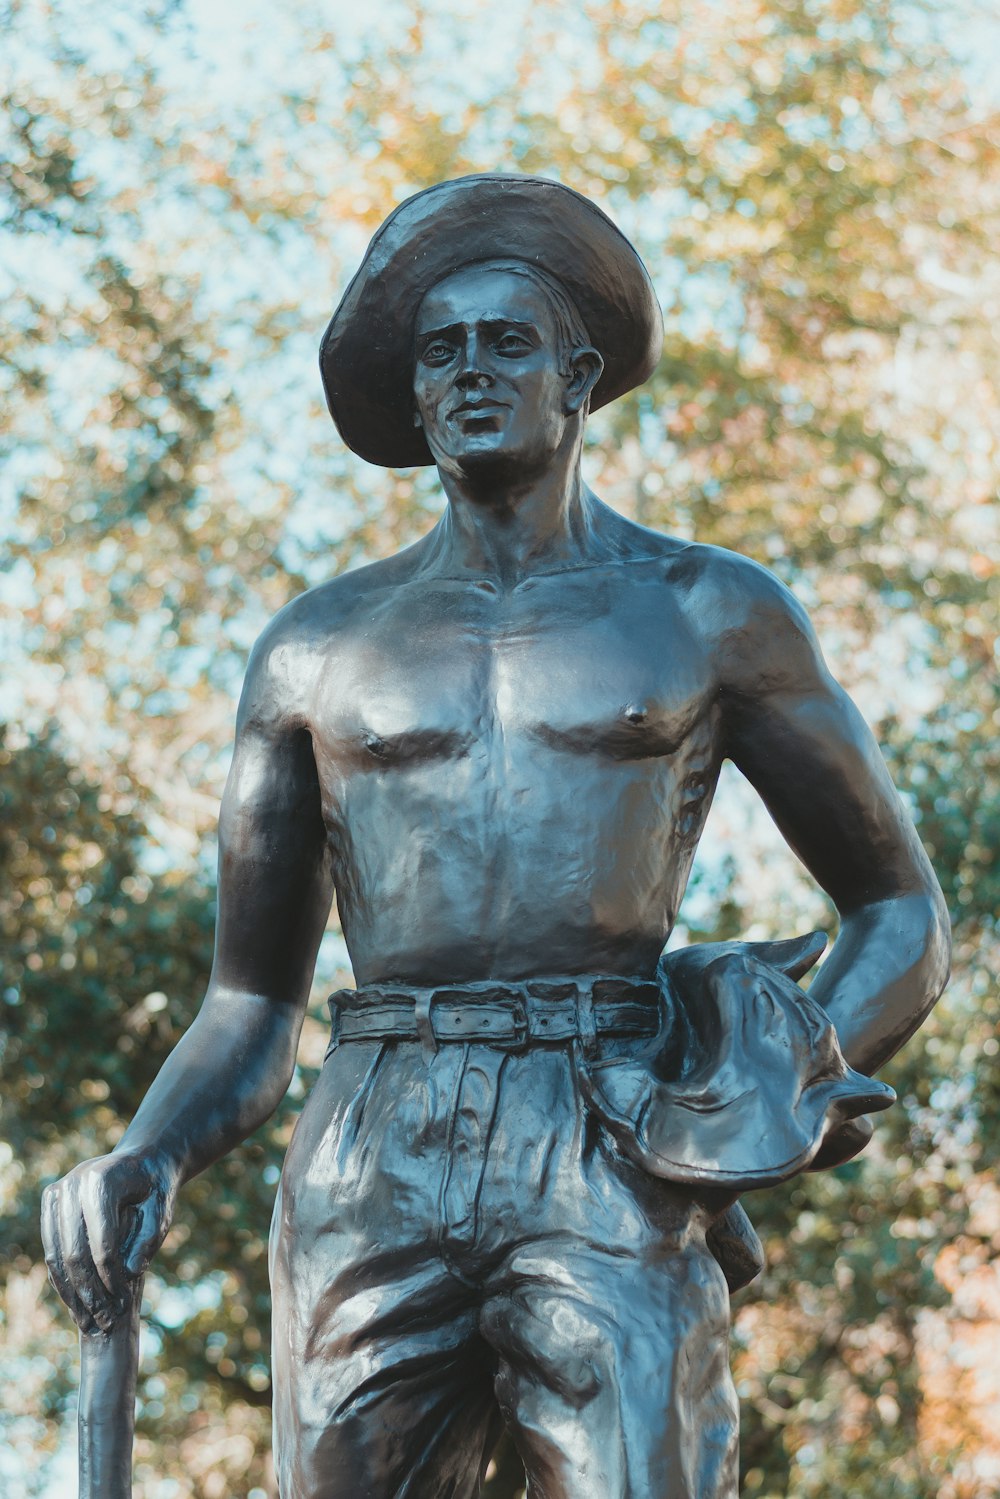 a statue of a man with a hat and cane